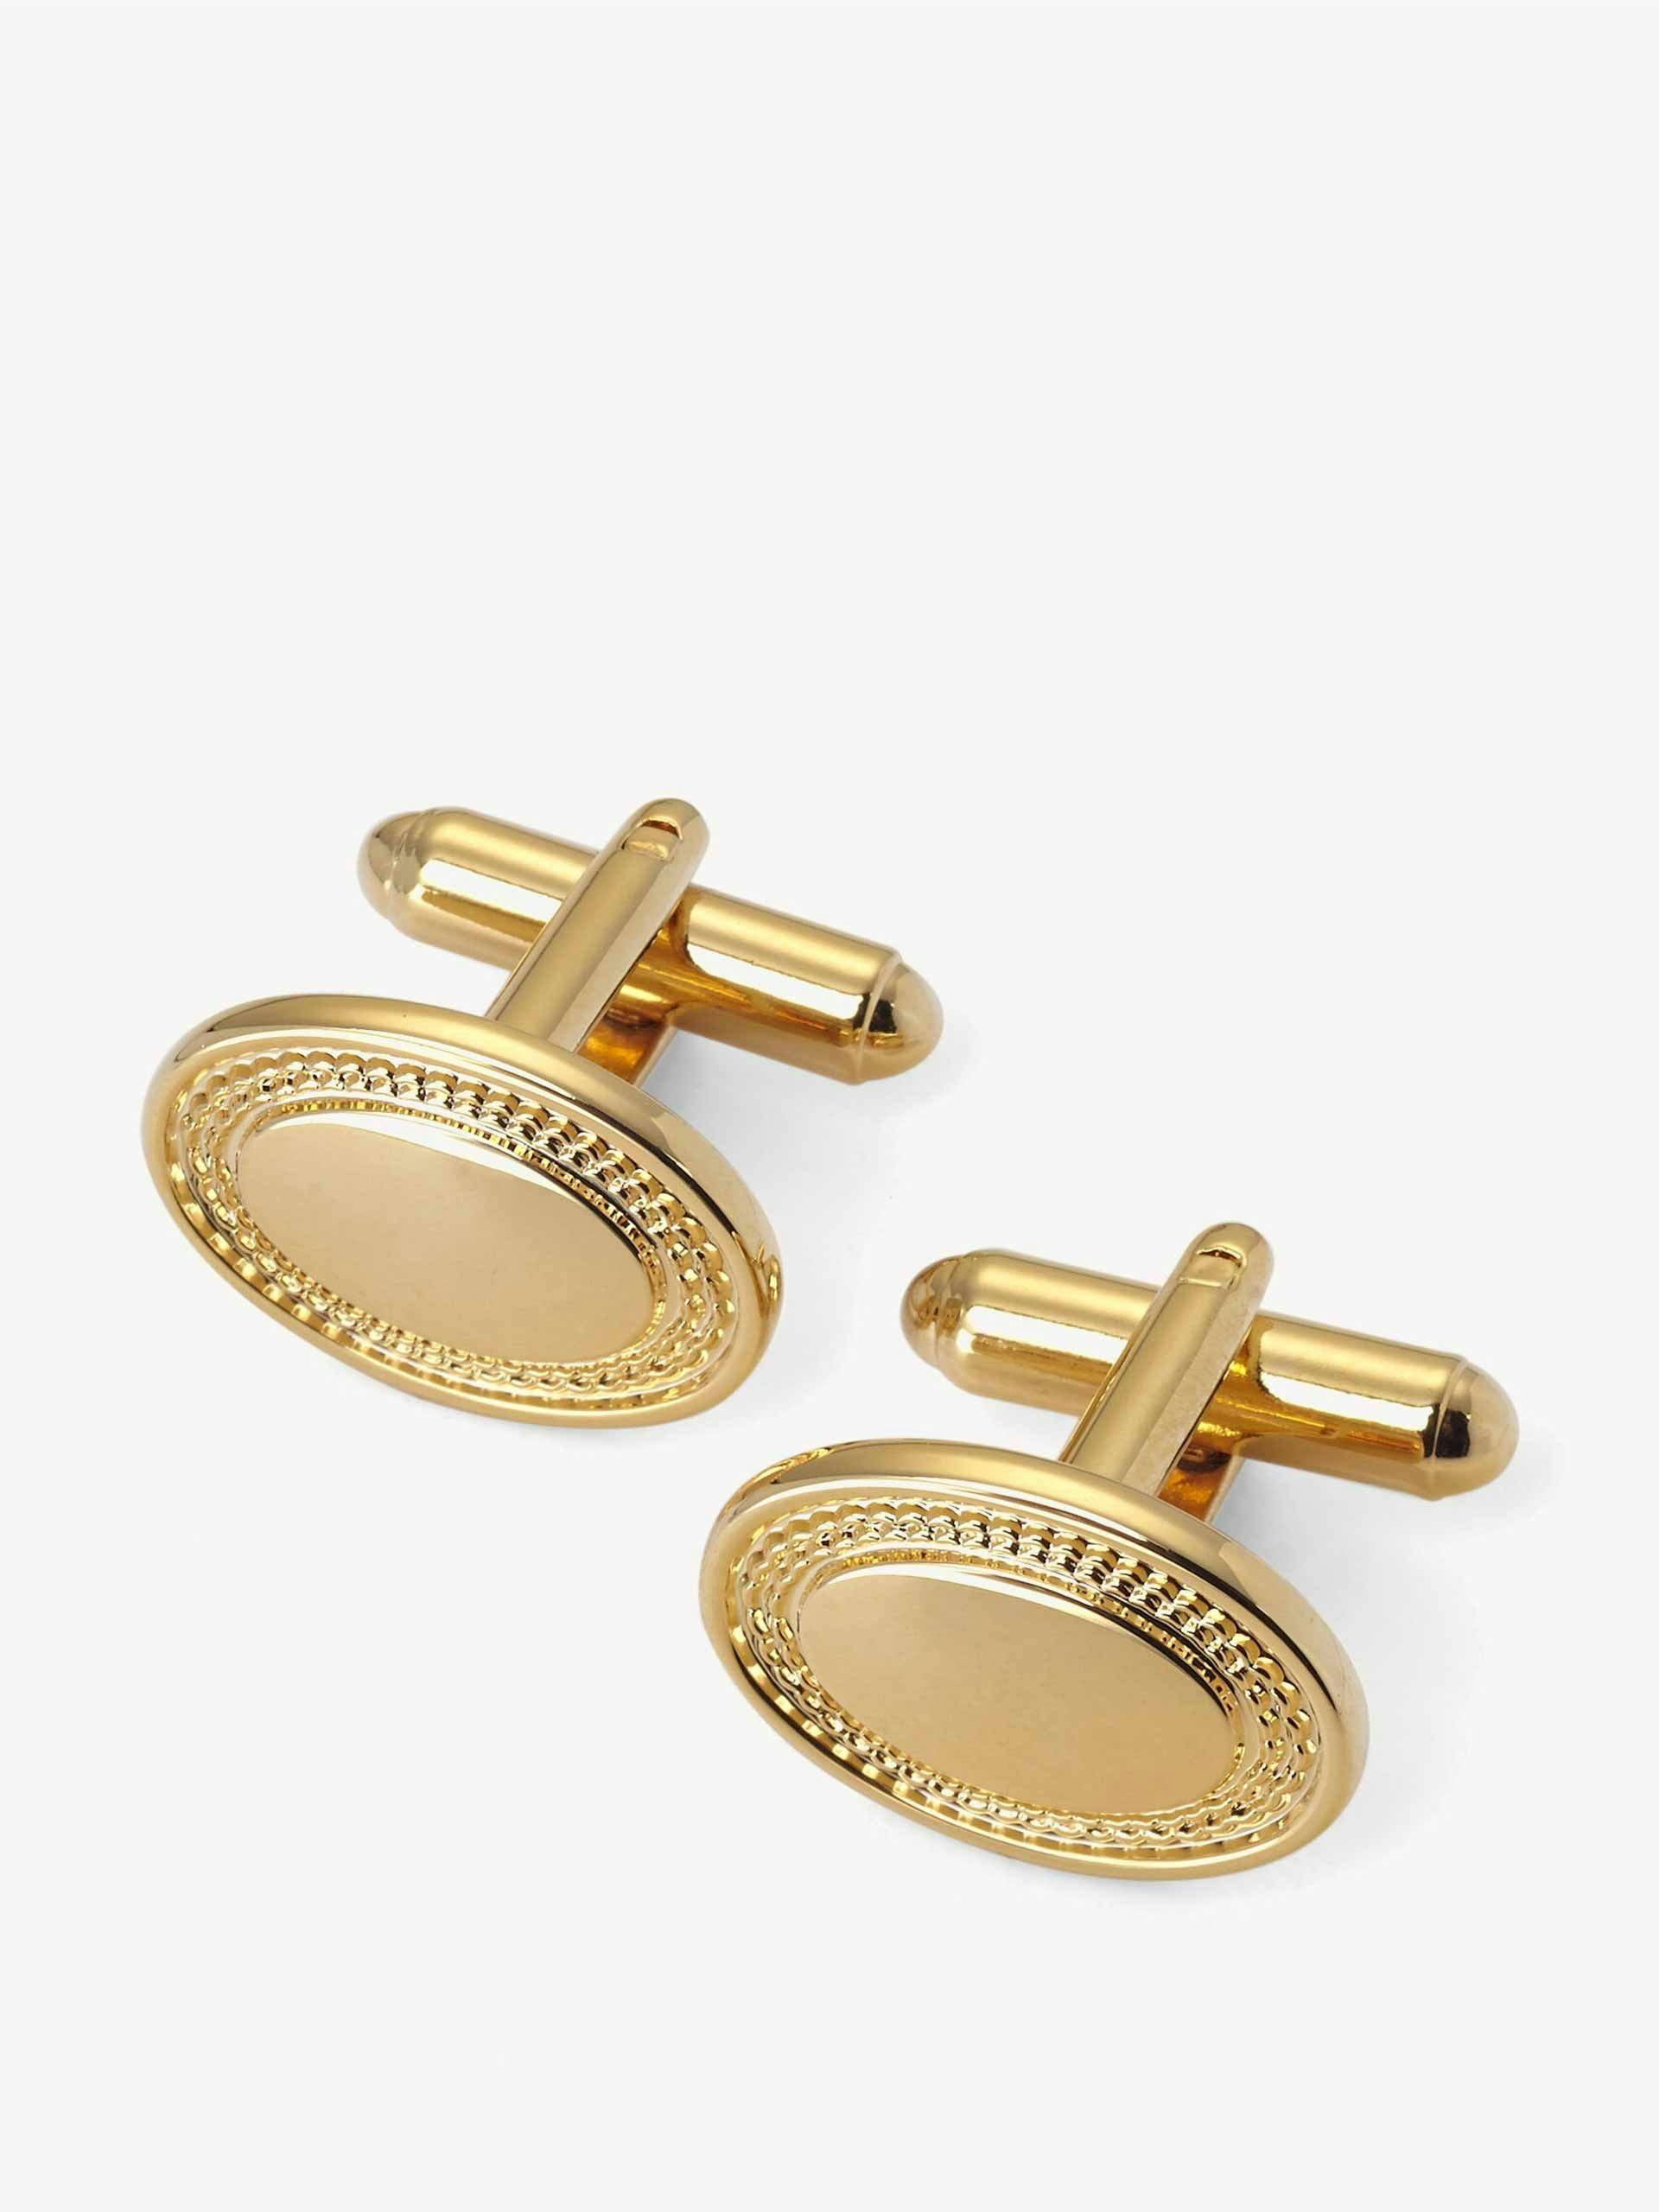 Gold engraved edge oval cufflinks